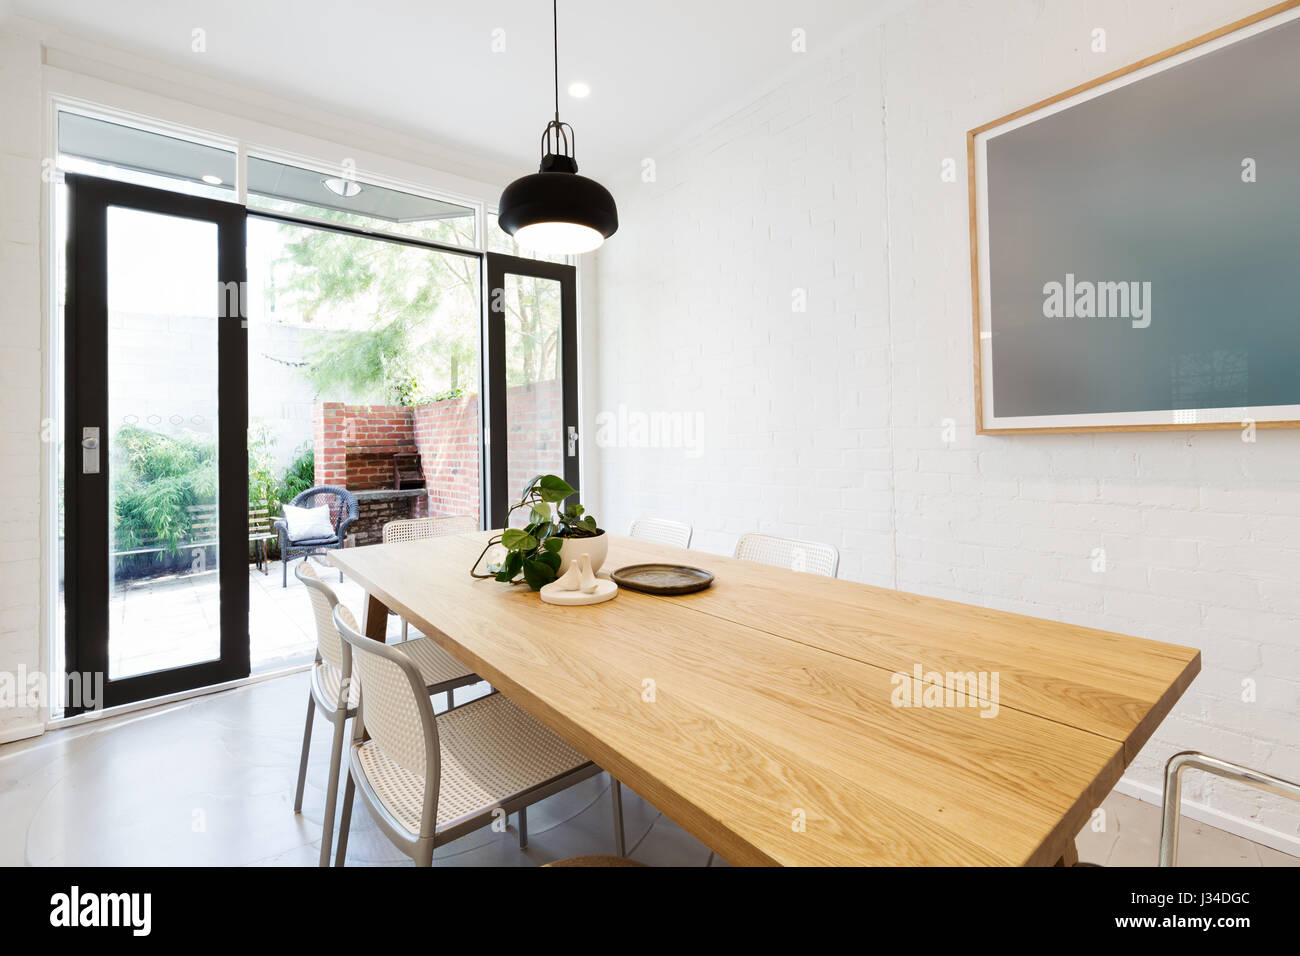 Scandi styled dining room interior with outlook to courtyard through open french doors Stock Photo